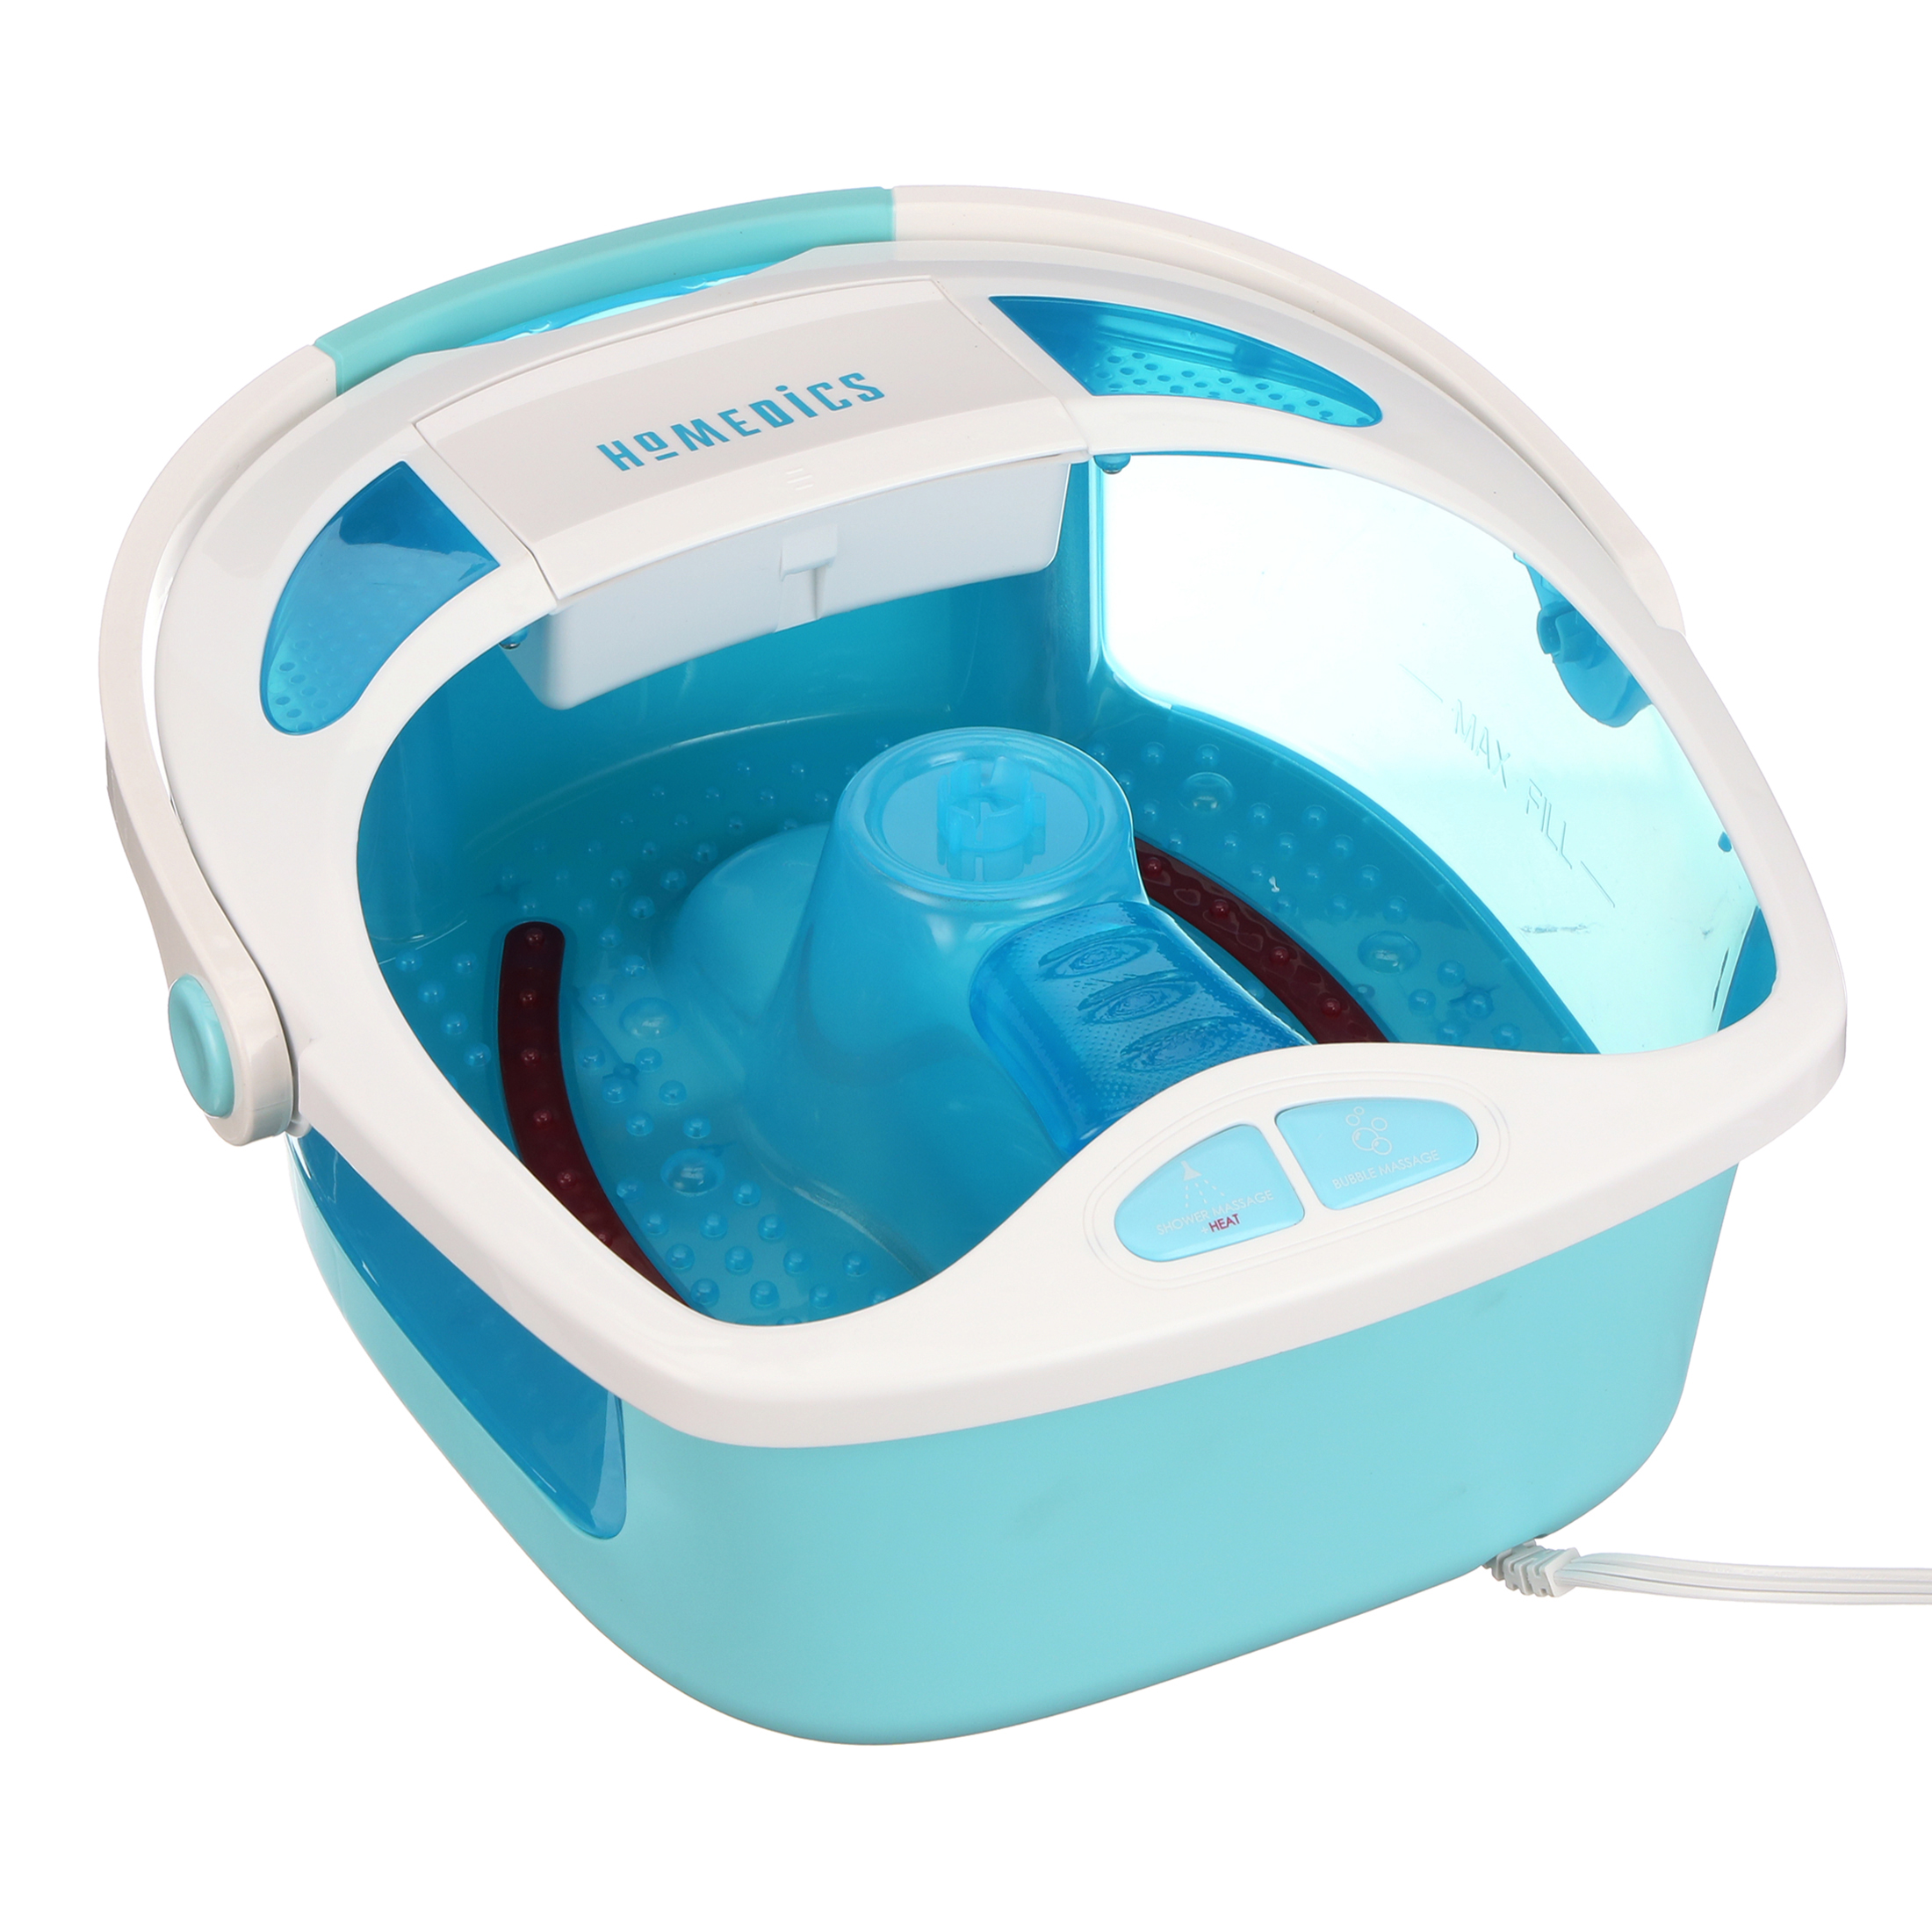 Homedics Shower Bliss Footspa with Massaging Water Jets, 3 Attachments and Toe-Touch Controls, FB-625 - image 1 of 18